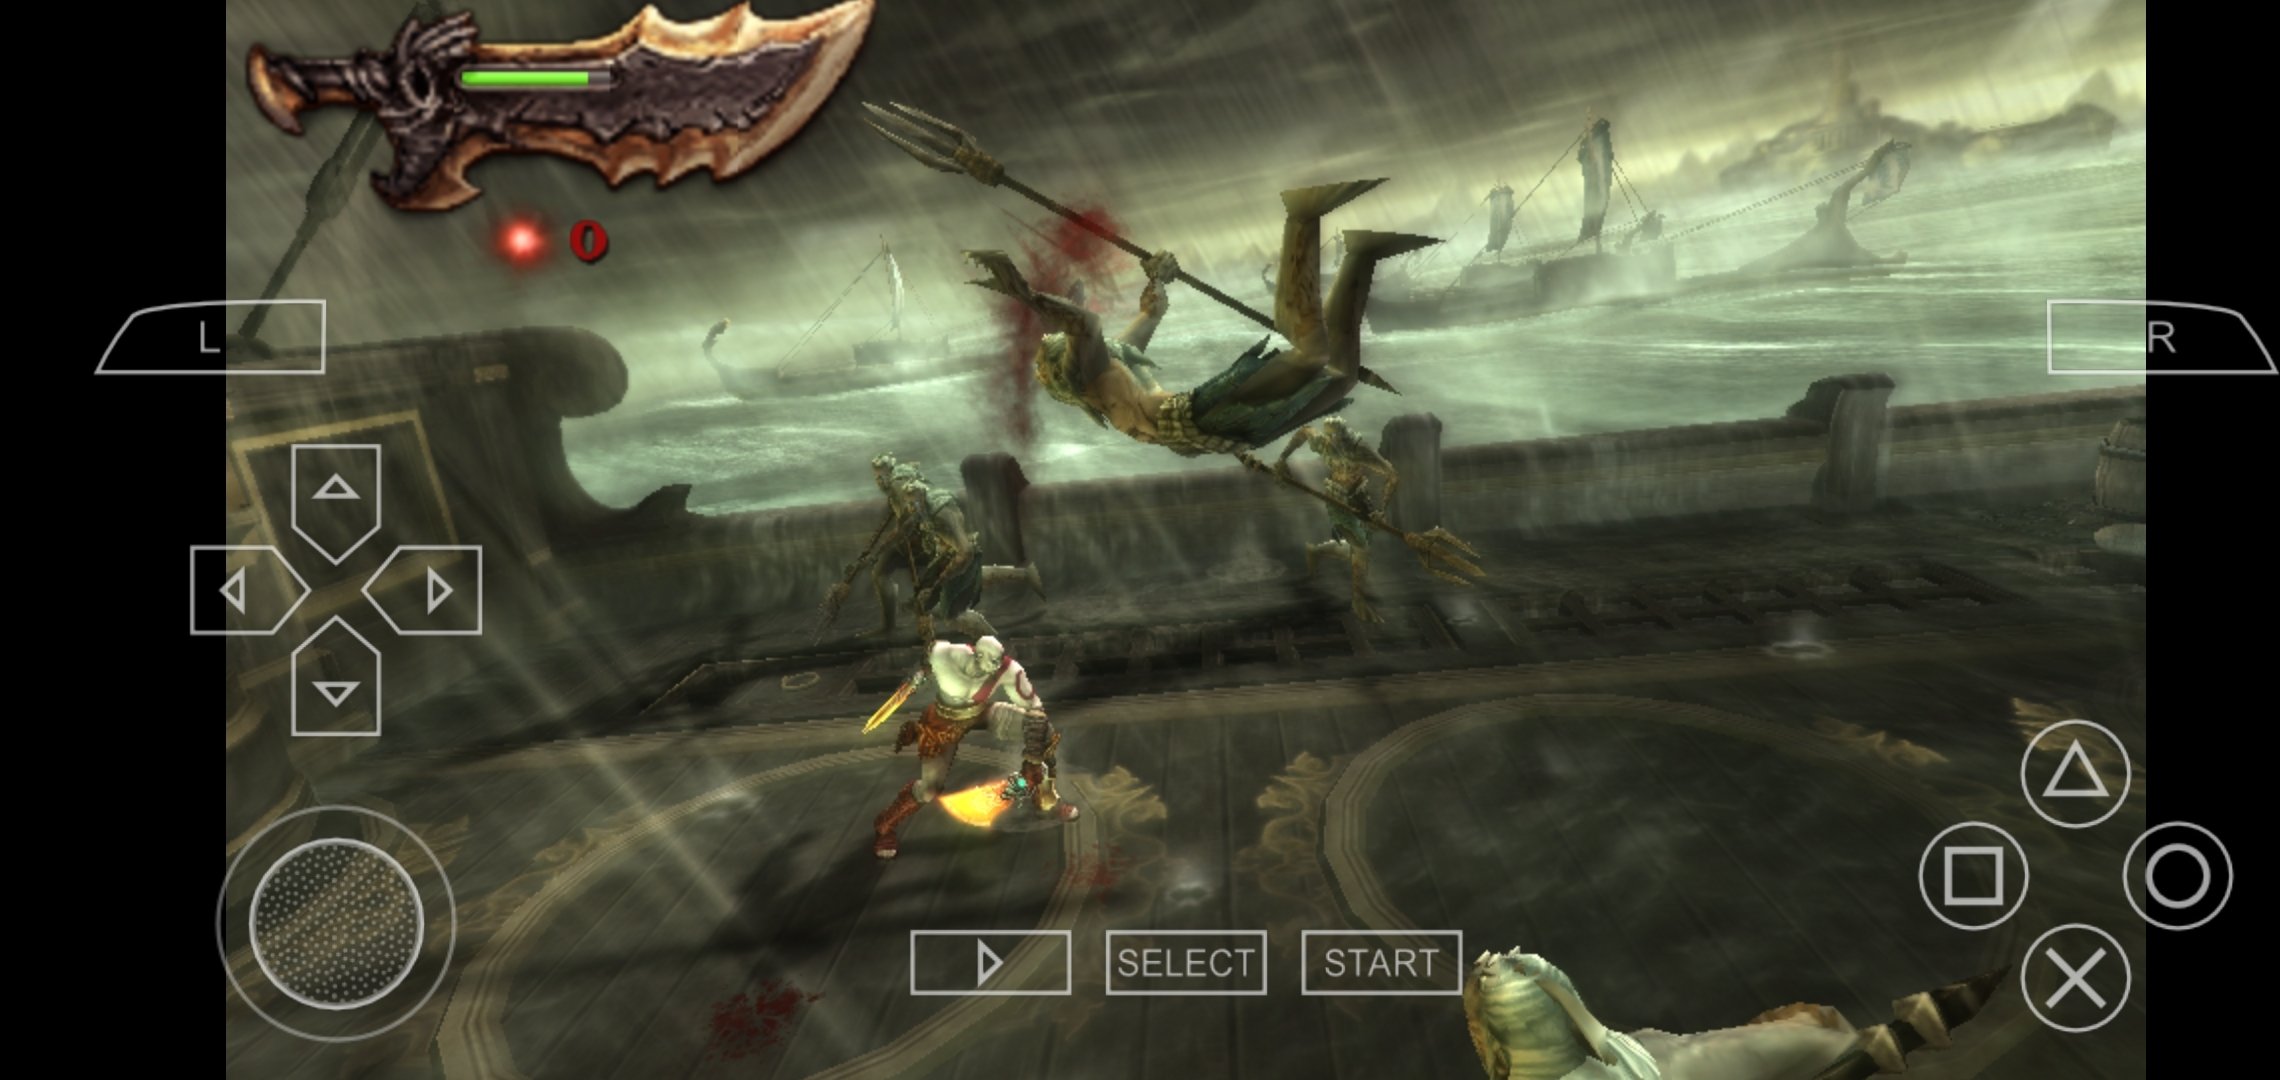 Download do APK de New God Of War Ghost Of Sparta Guia para Android